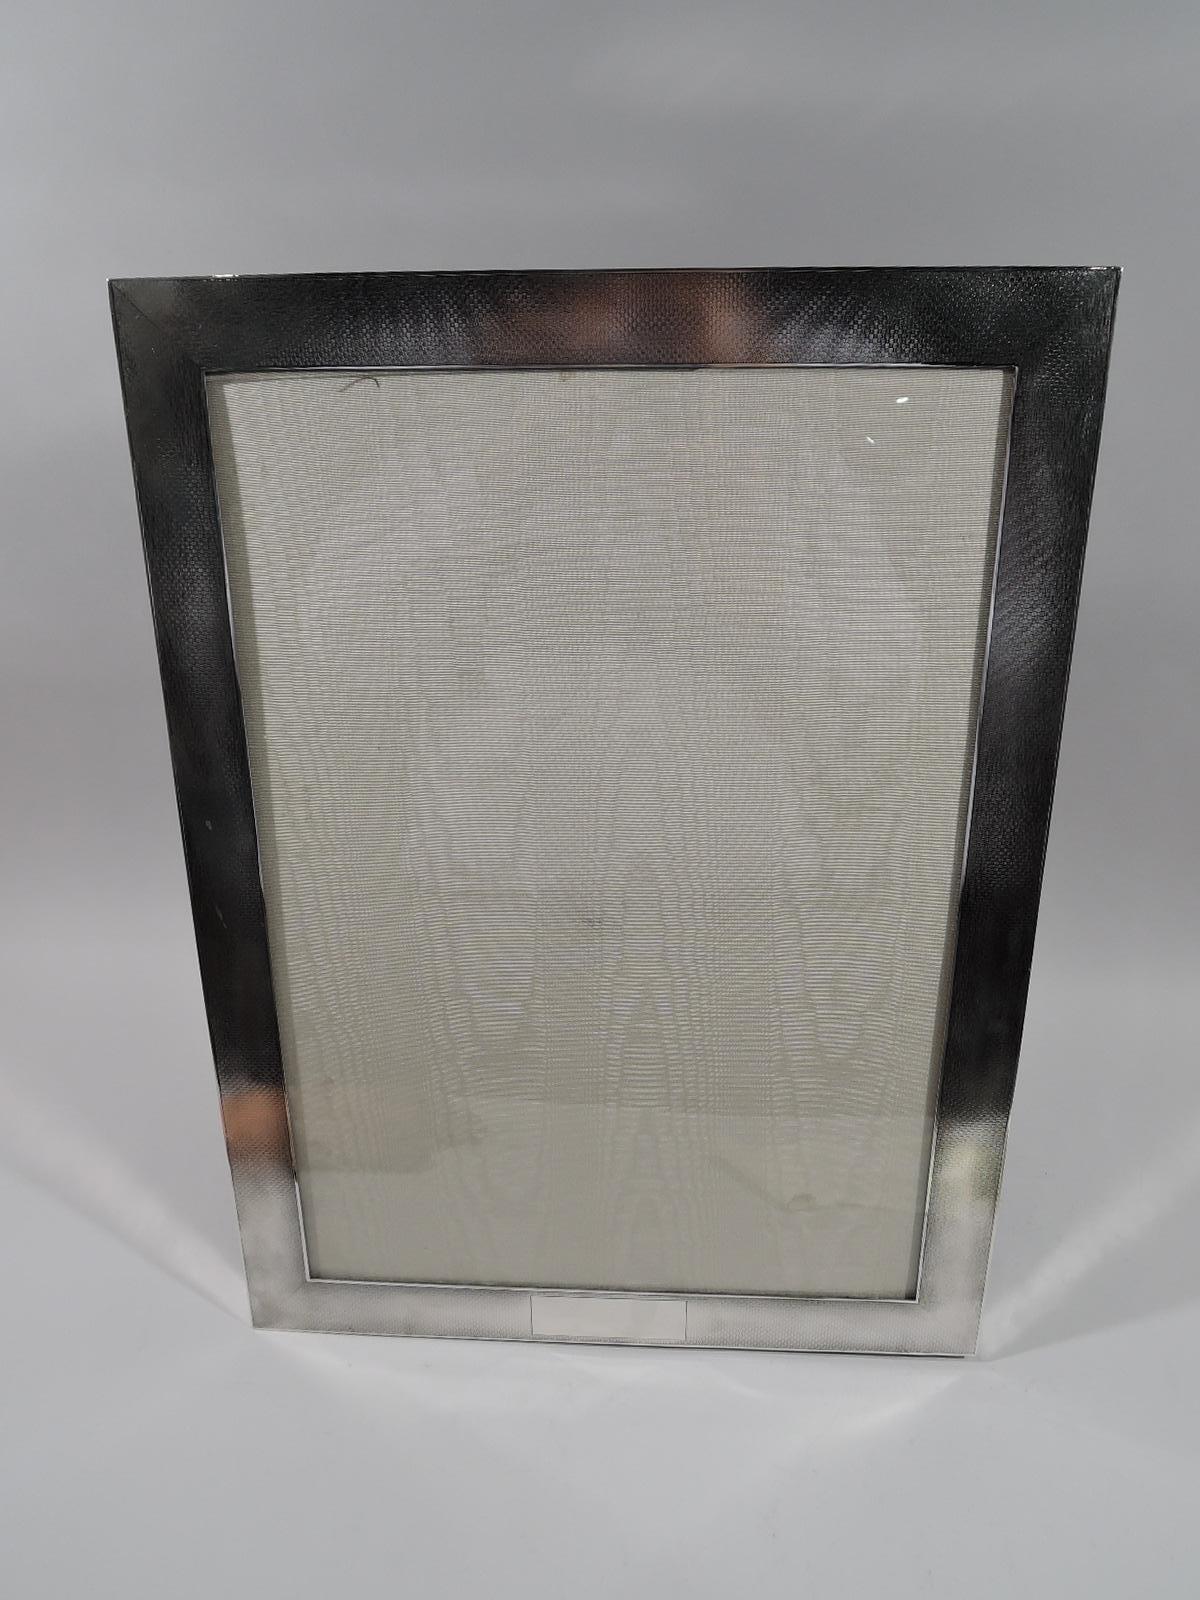 Very large sterling silver picture frame. Made by William B. Kerr in Newark, circa 1910. Rectangular window in flat surround with all-over engine-turned basket weave; sides plain. Rectangular cartouche (vacant). With glass, silk lining, and velvet